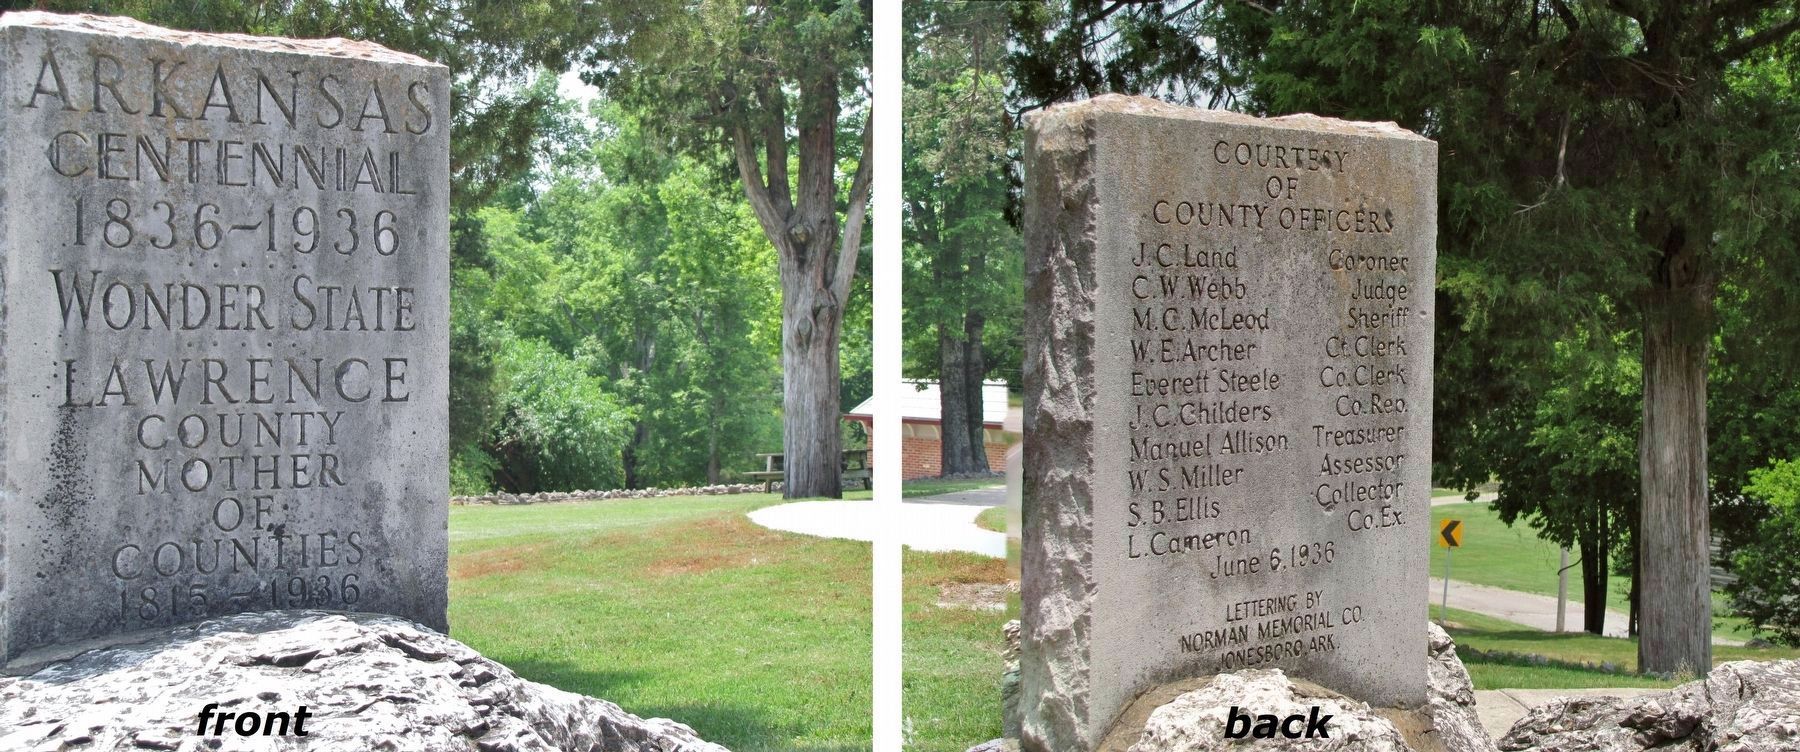 Arkansas Centennial Marker (<i>located in front of Powhatan Courthouse</i>)</center> image. Click for full size.